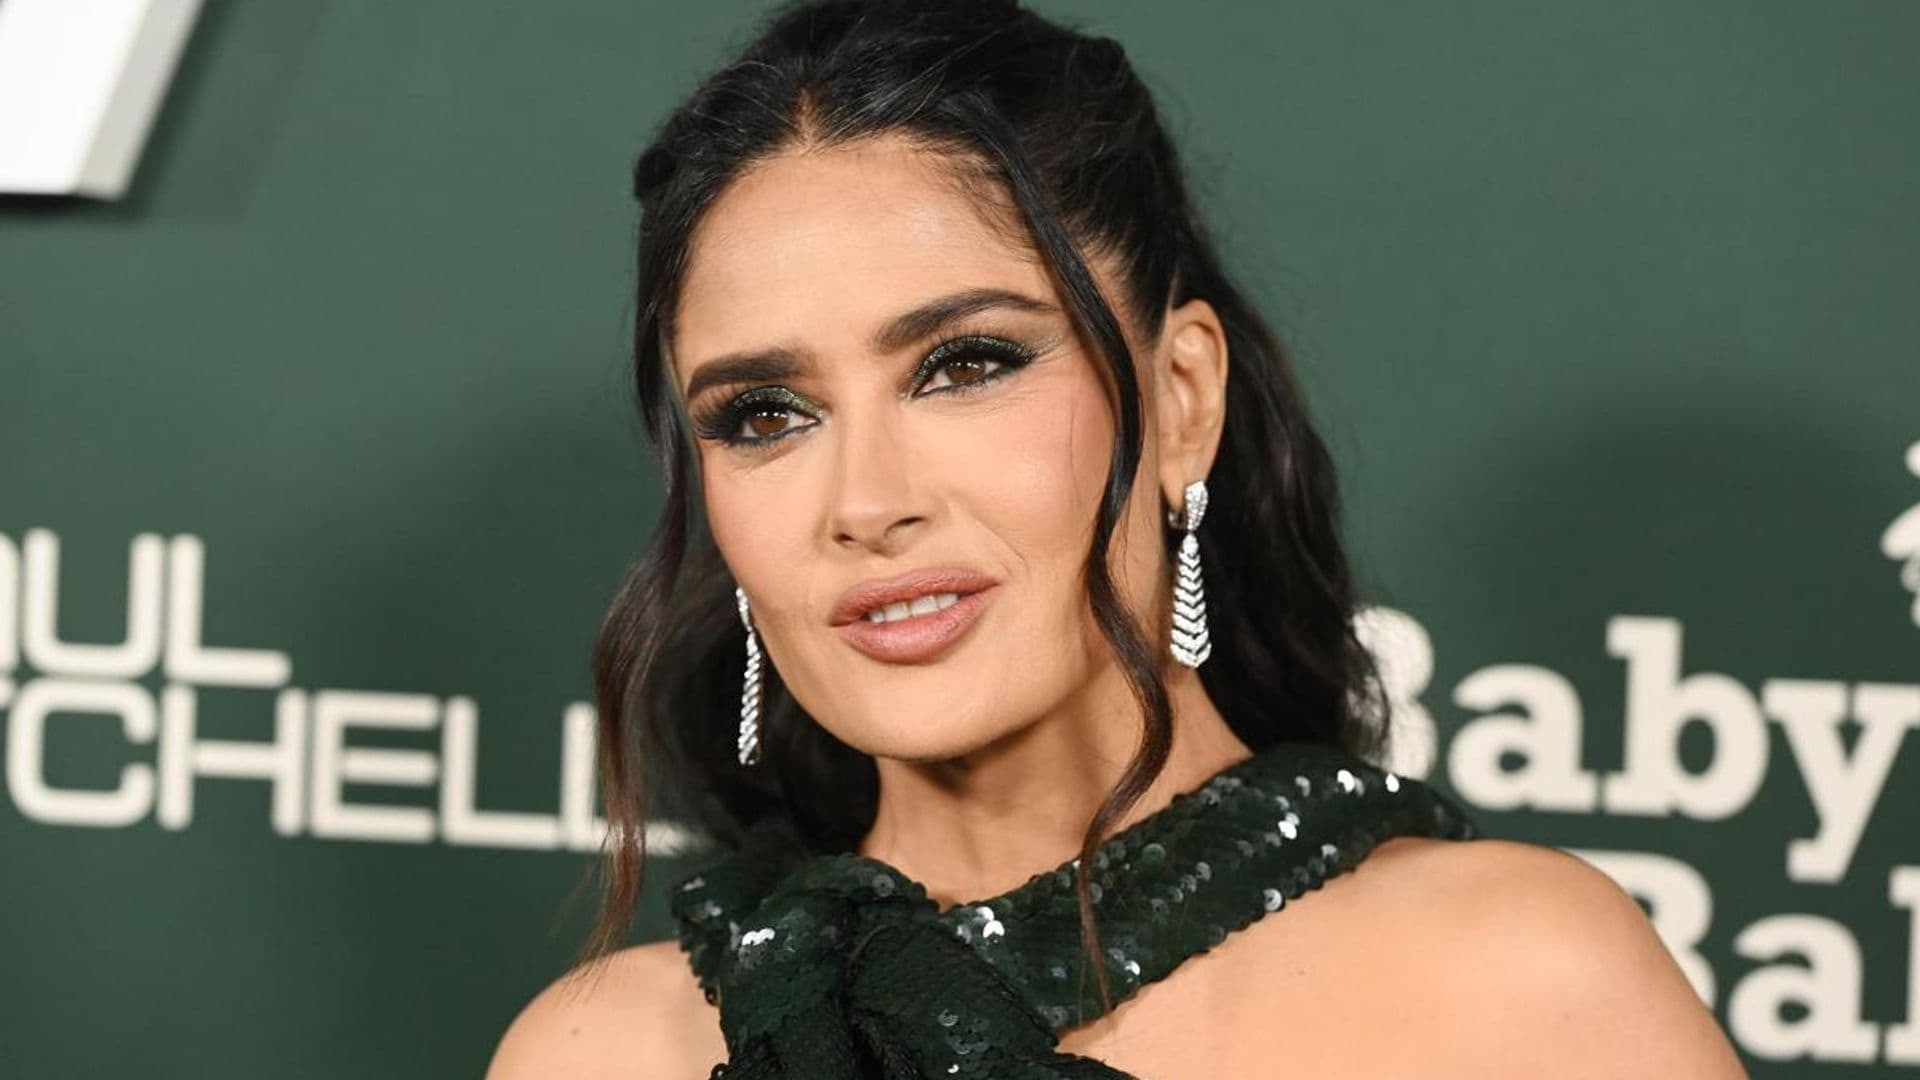 Salma Hayek celebrates International Women’s Day with special message: ‘Coming together’